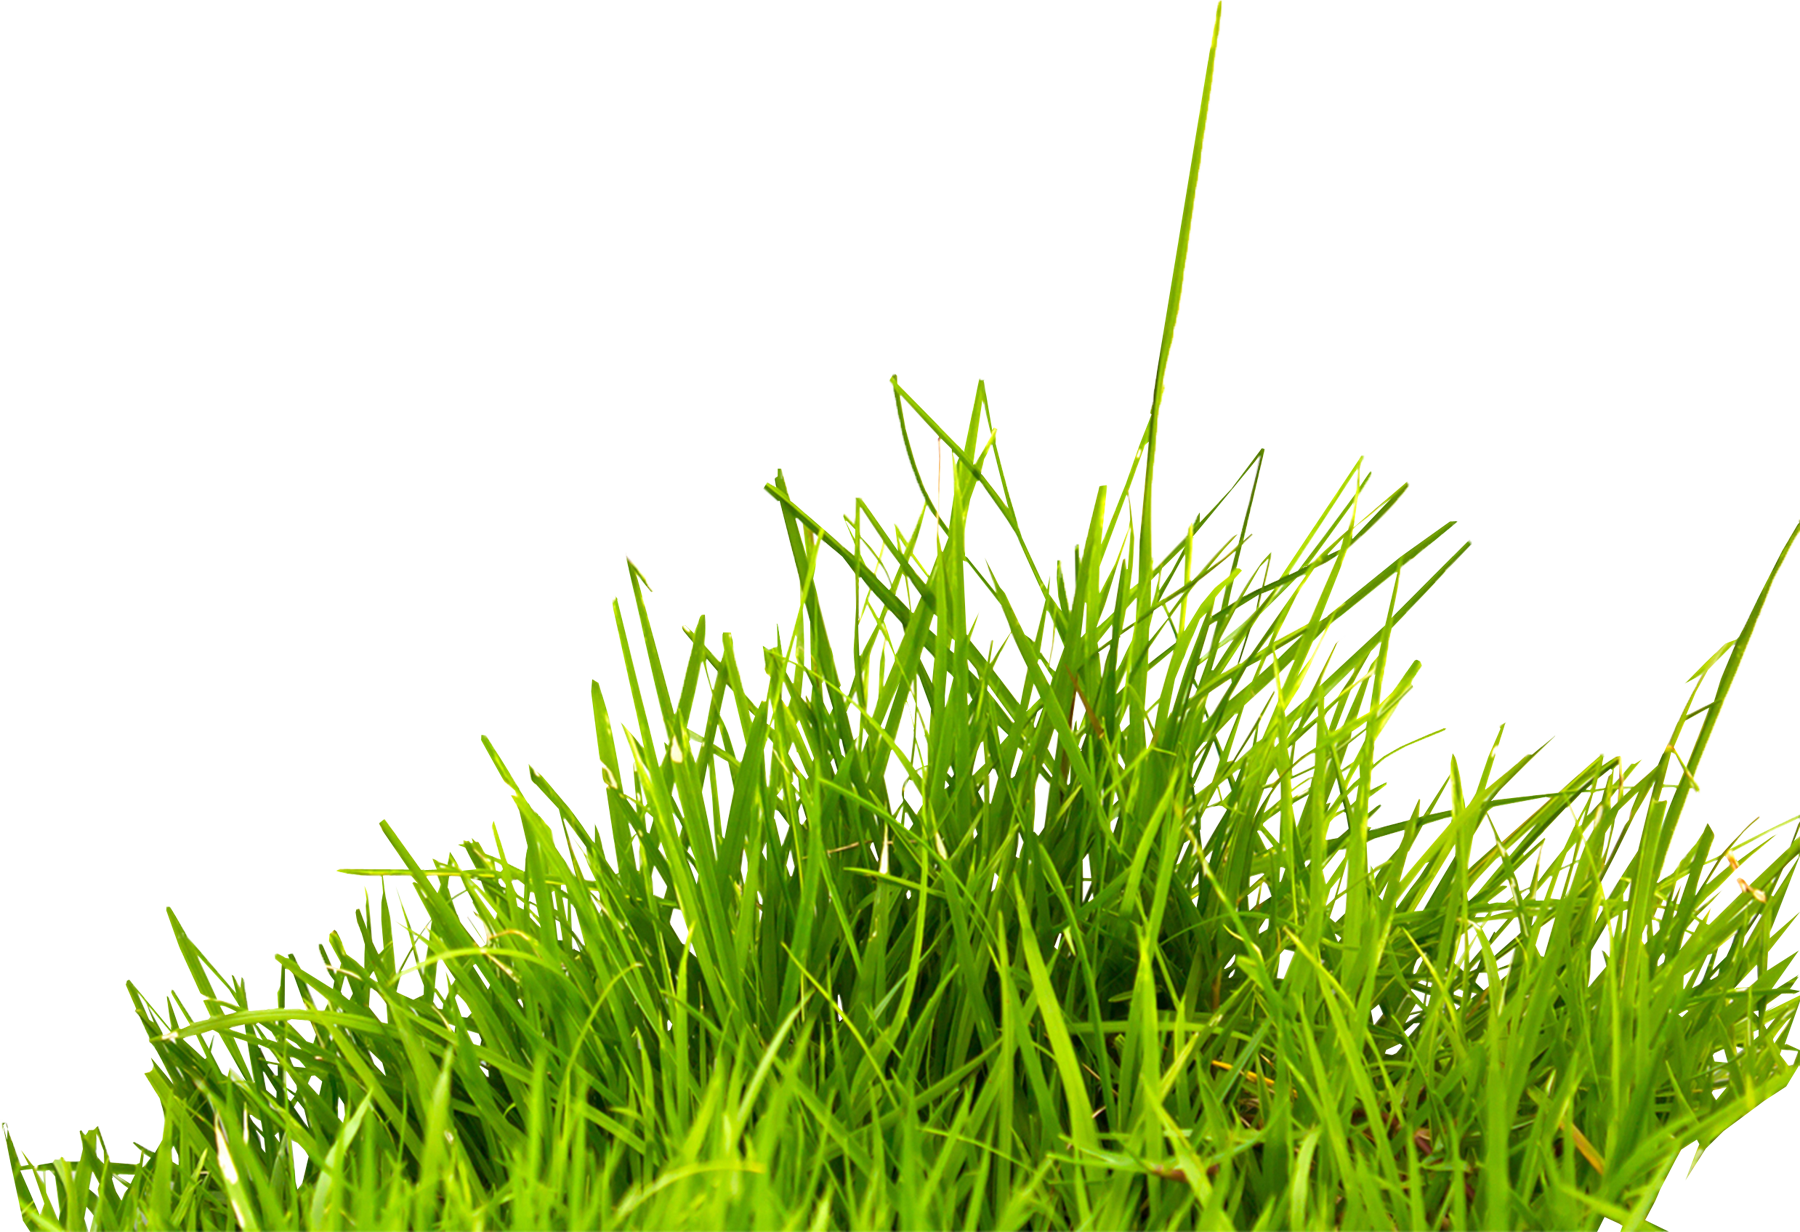 Grass Free Clipart HQ PNG Image